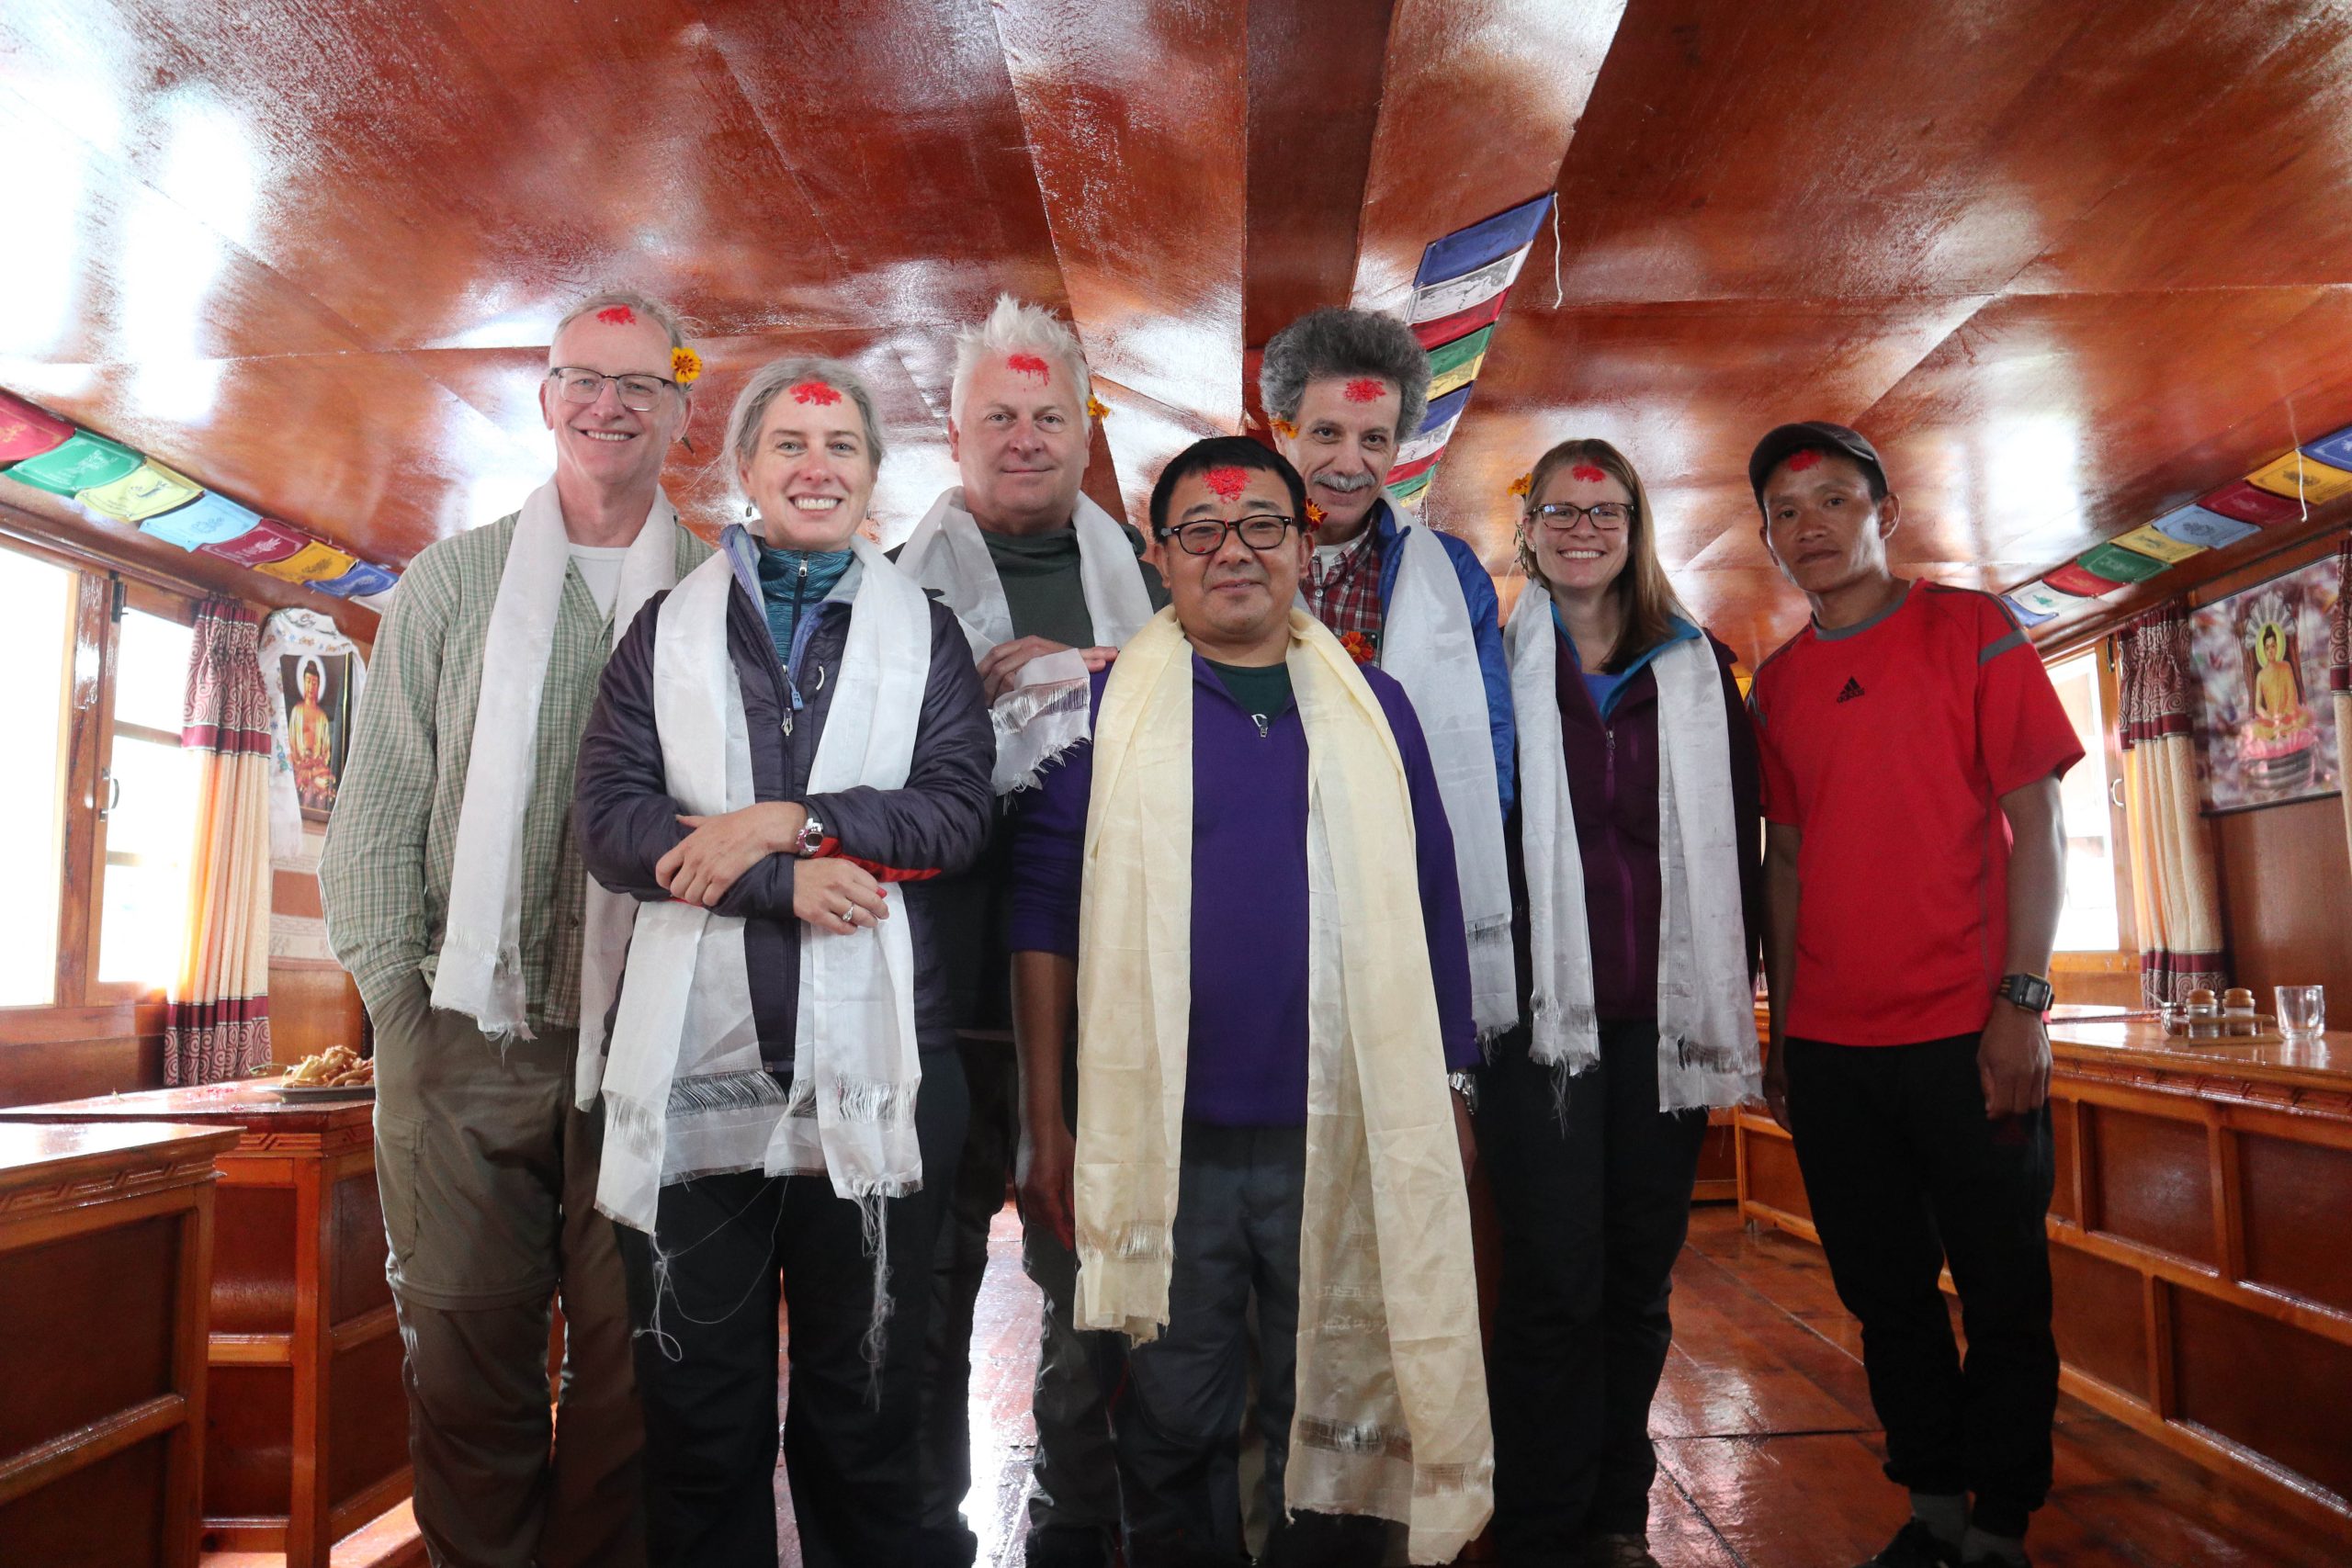 The Carolina research group with their guides celebrating a Nepali national holiday on the second day of the trek. (The red mark on their foreheads, tika, is a blessing ritual). From left, Harvey Seim, Lauren Leve, Rich McLaughlin, guide Deep Rai, Roberto Camassa, Emily Eidam and guide Daman Rai. (photo courtesy of Emily Eidam).